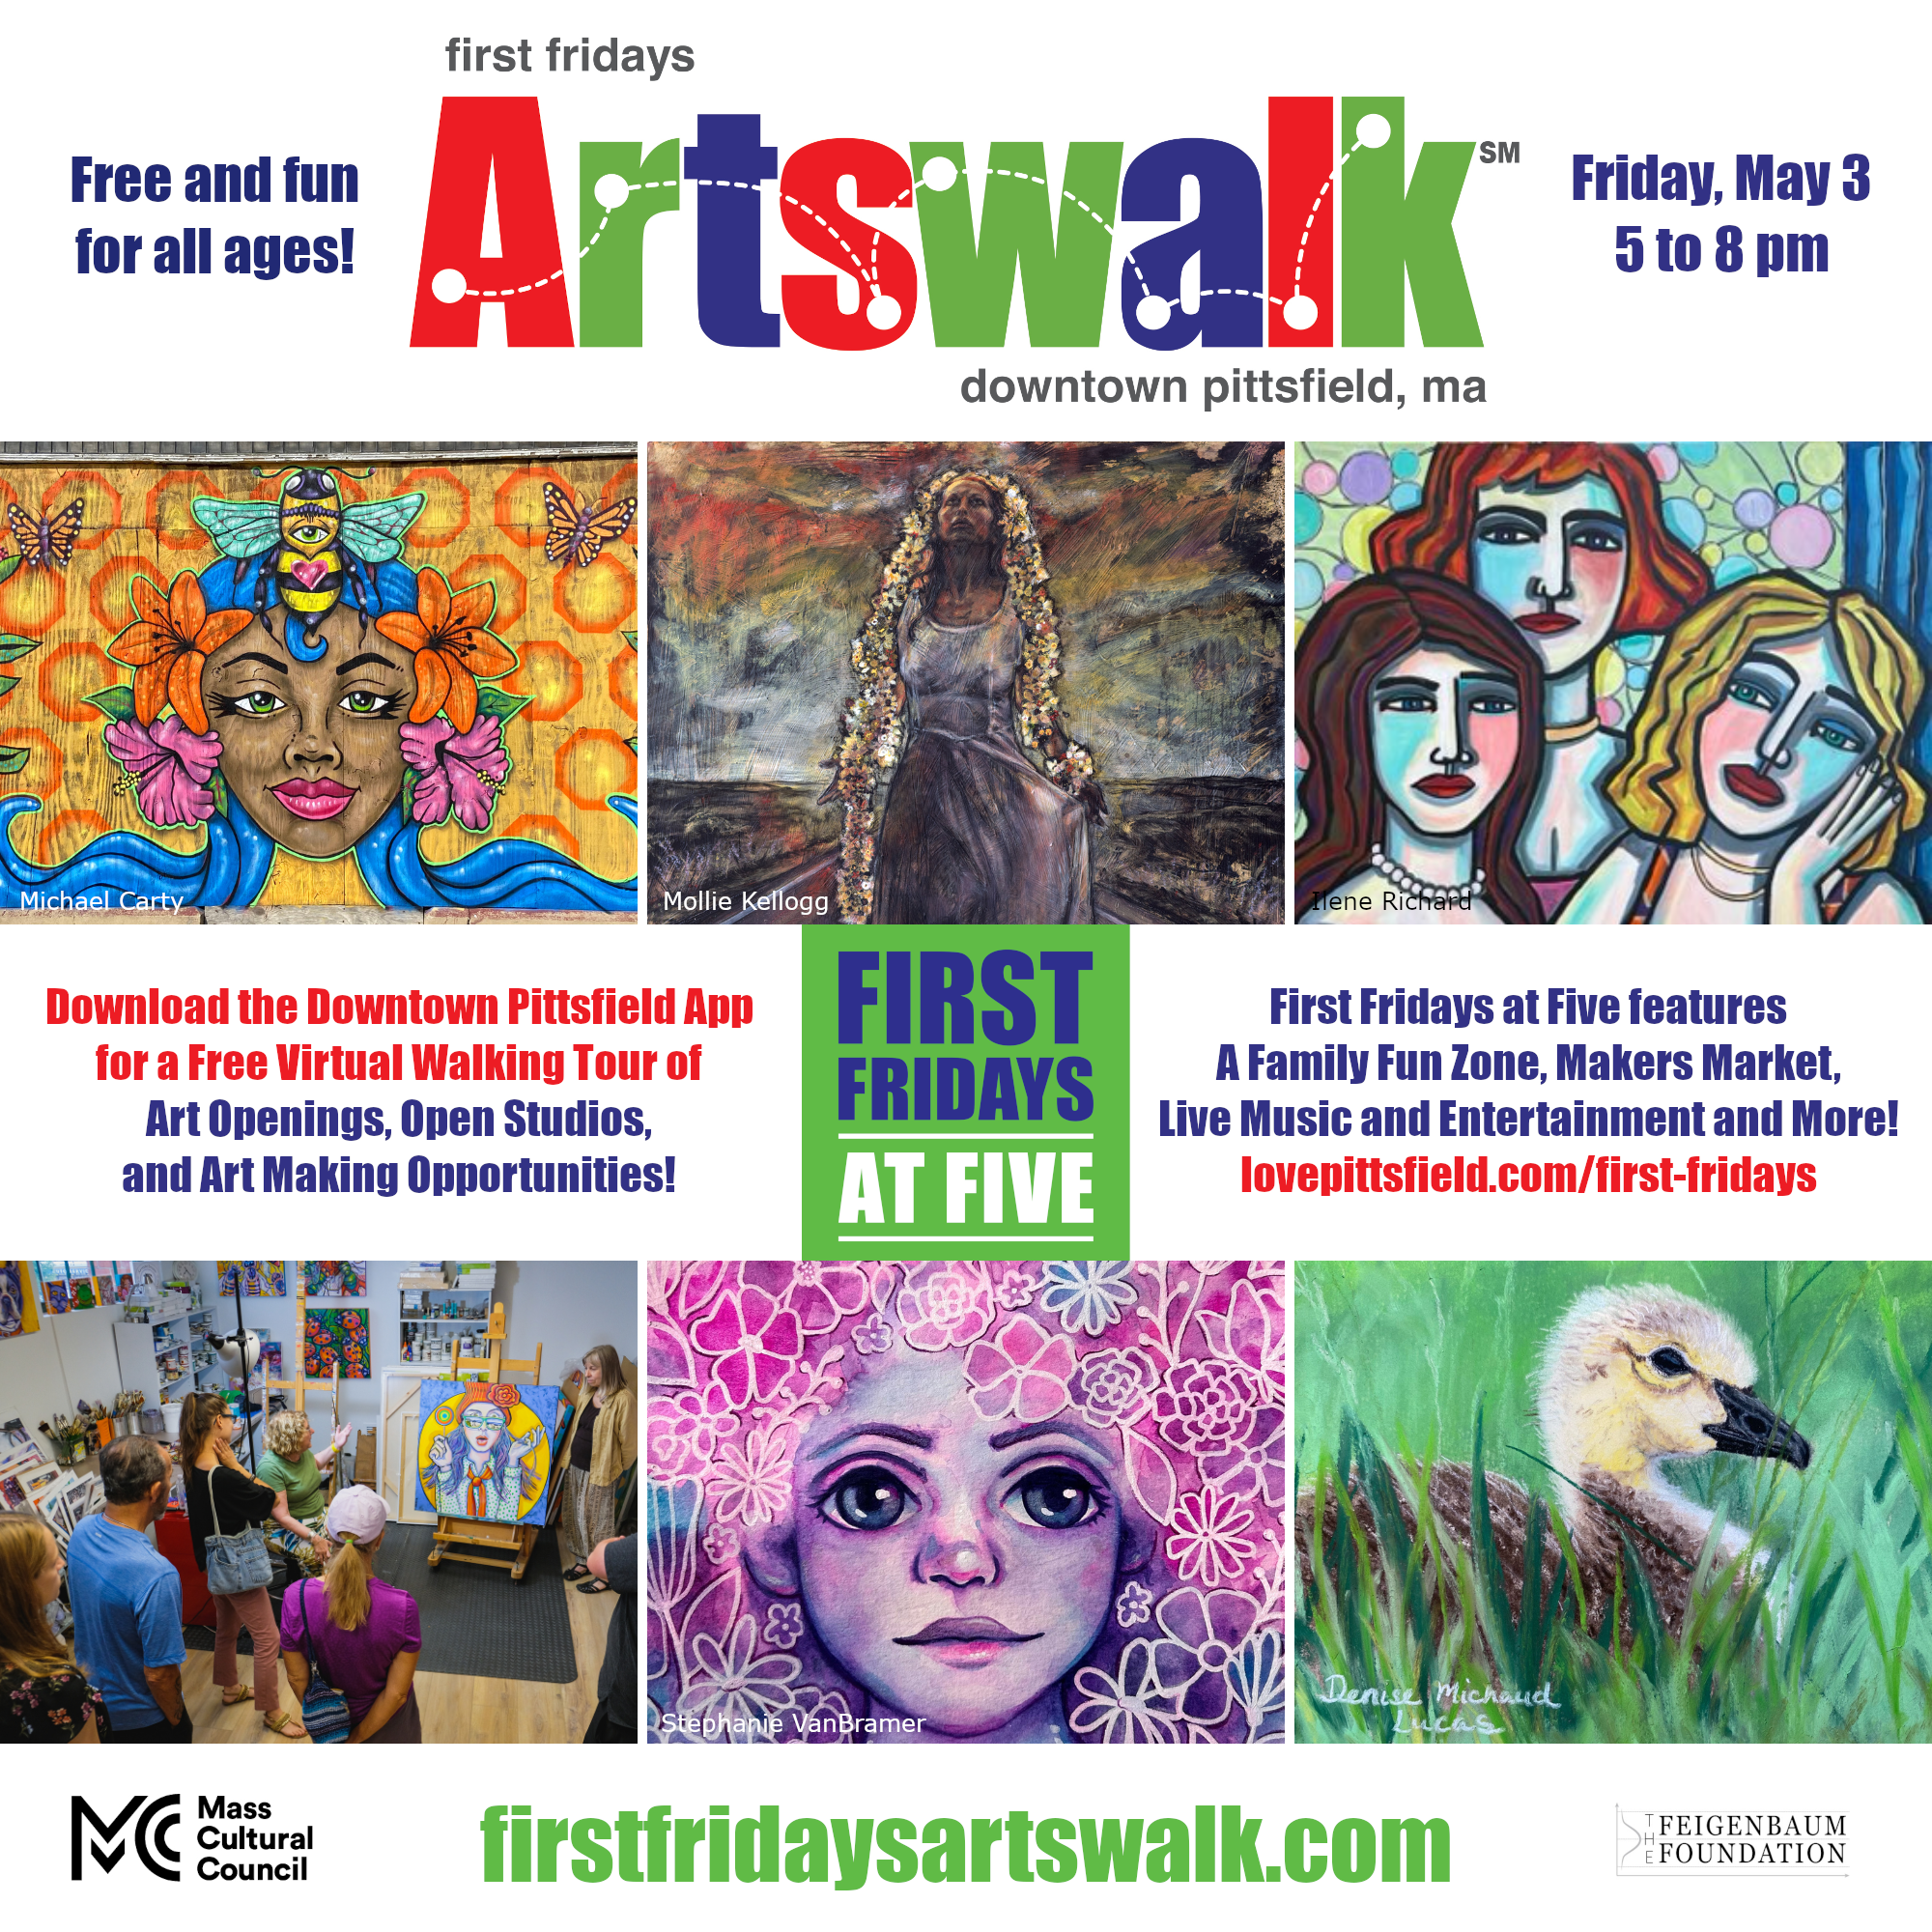 May 3rd First Fridays Artswalk as part of First Fridays at Five!